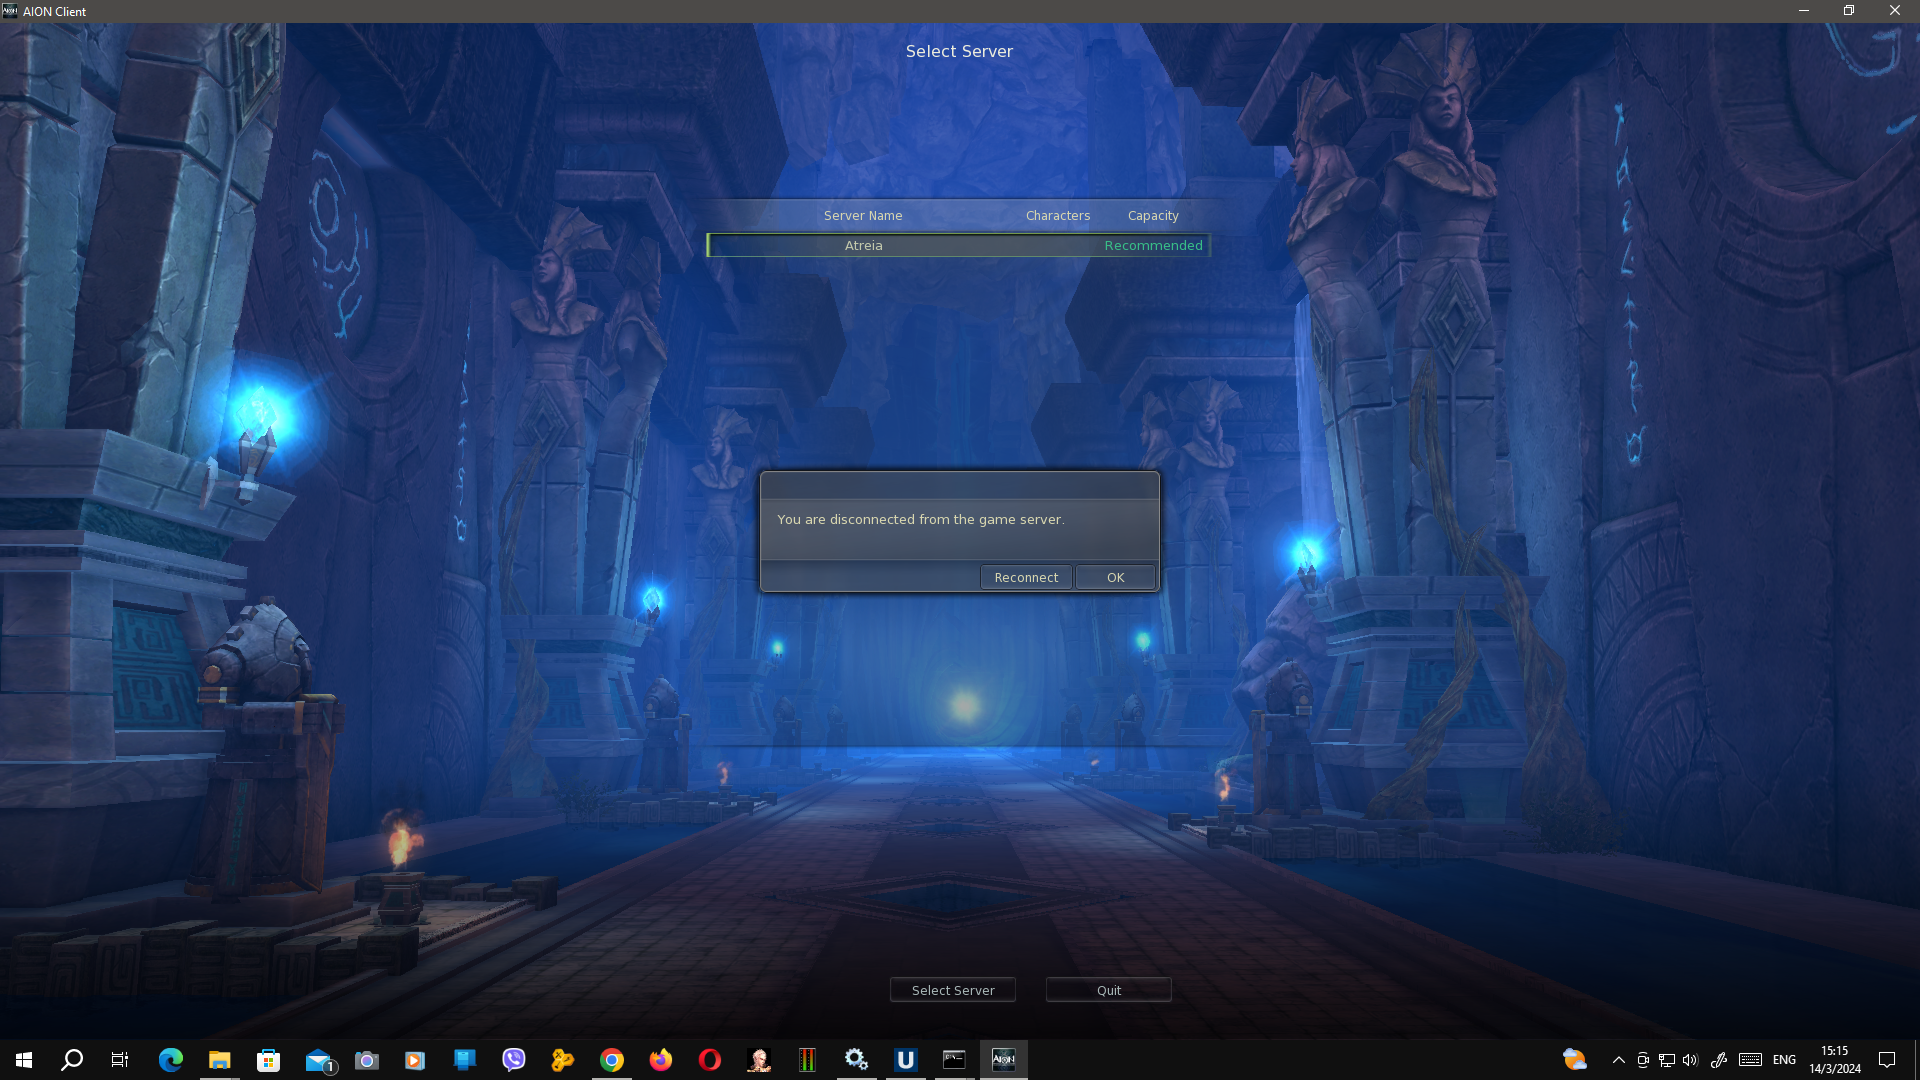 1710422202153 - Aion 4.3 you have disconected from the game server - RaGEZONE Forums